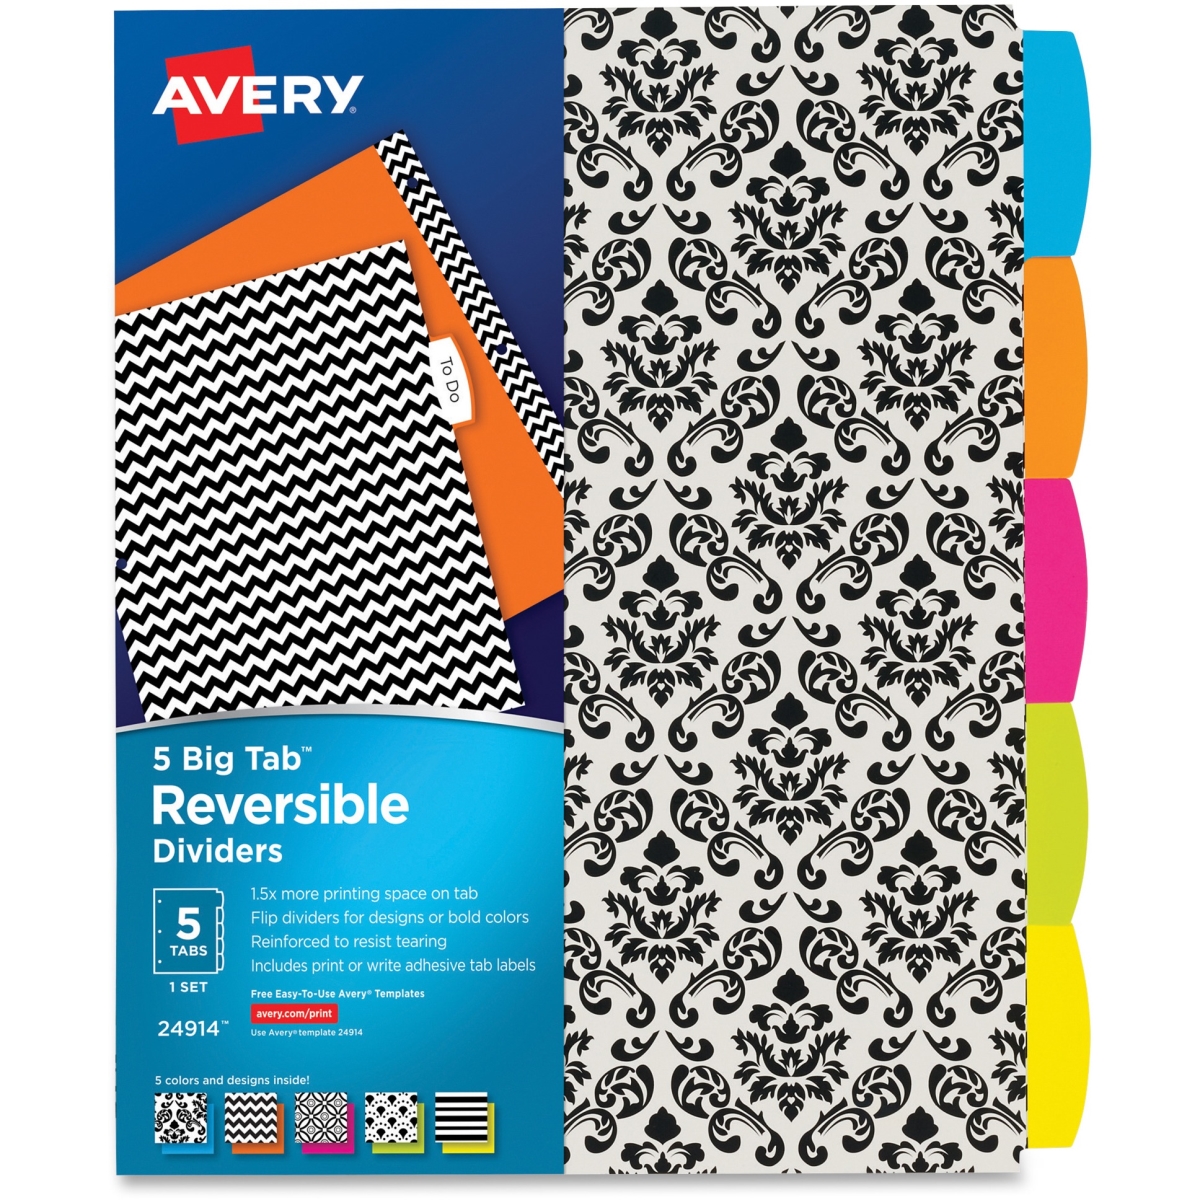 Ave24914 Write & Wipe Yellow Clouds - 5 Tabs, Black & White